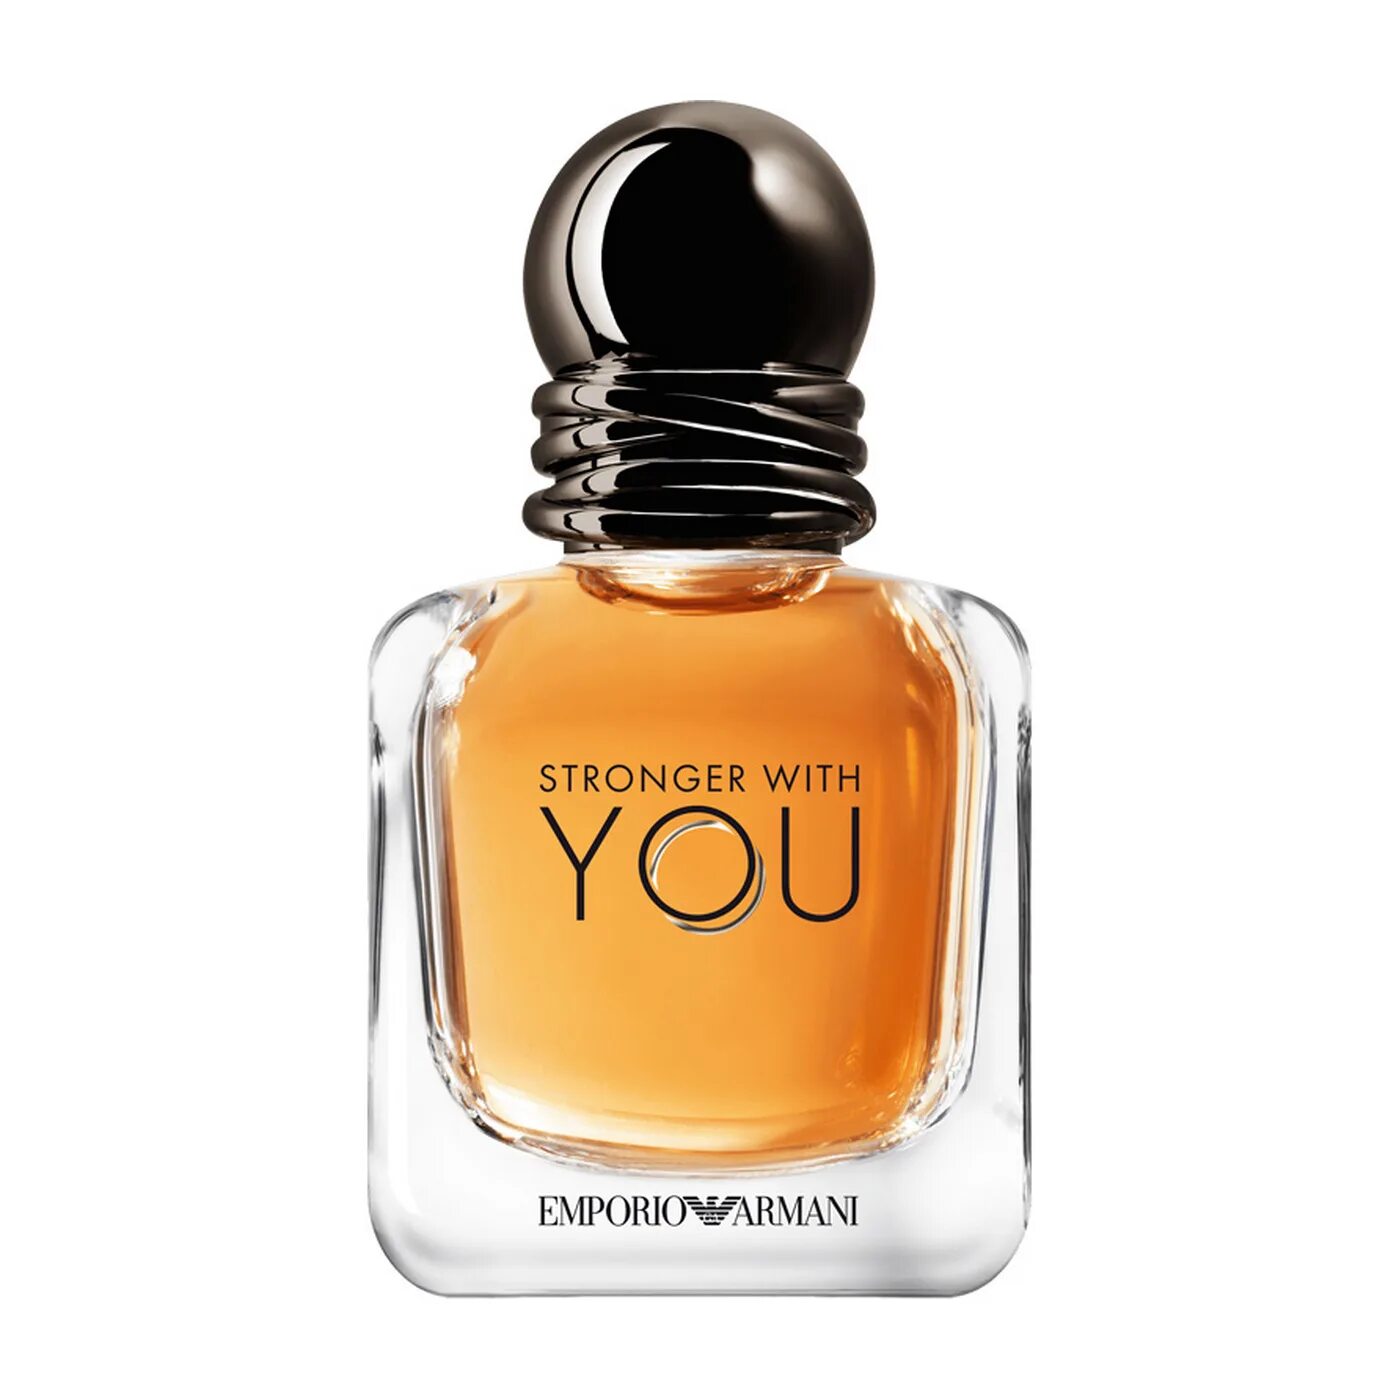 Stronger with you only. Emporio Armani stronger with you 100ml. Stronger with you Emporio Armani женские. Парфюм Emporio Armani stronger with you. Giorgio Armani Emporio Armani because it's you, Джорджио Армани, парфюмерная вода, 100 мл.